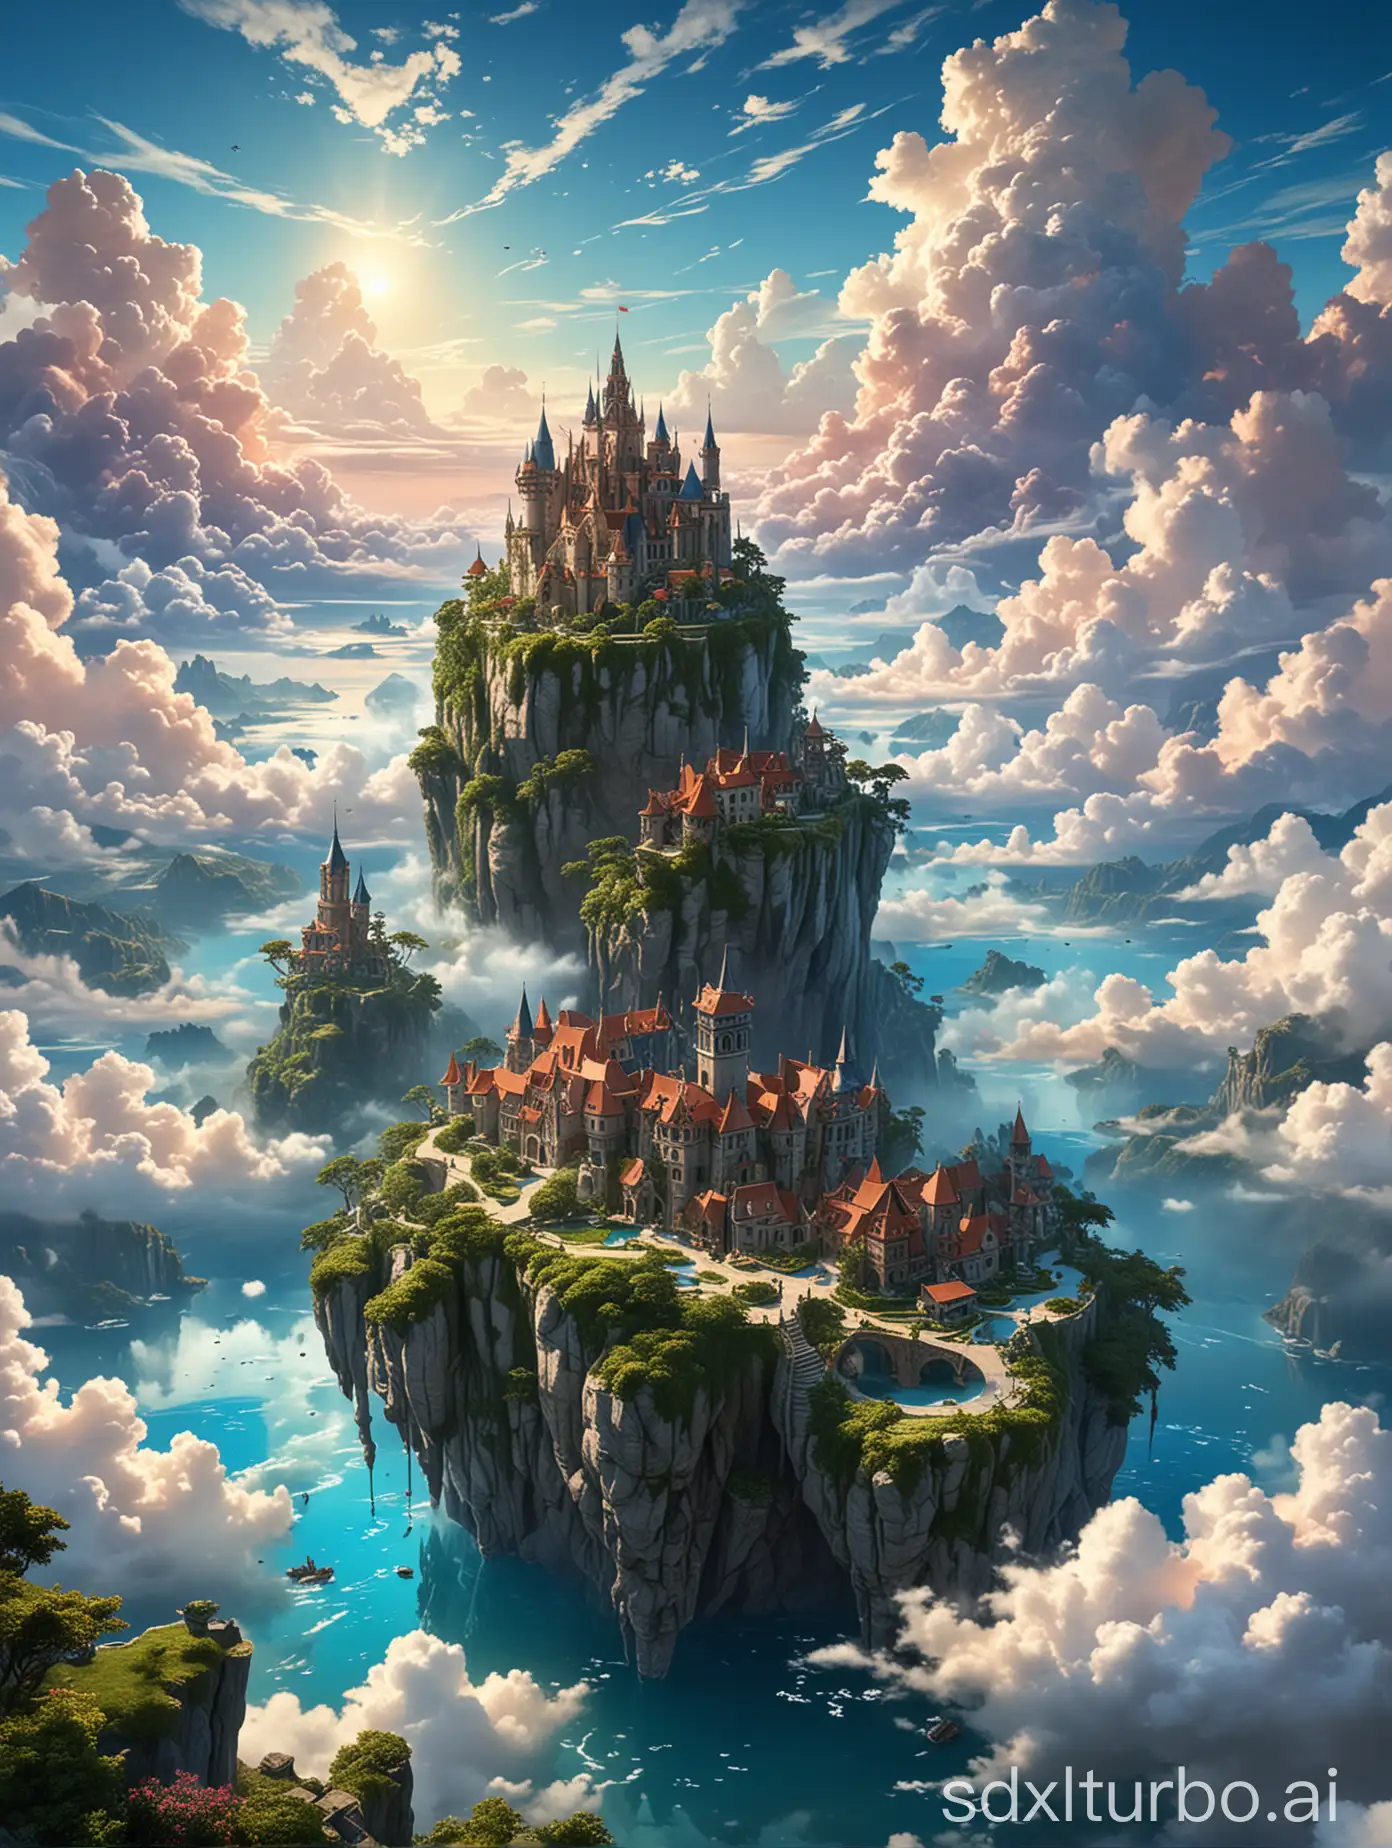 A majestic fantasy landscape with floating islands above a sea of clouds. The main island features an intricate medieval-style structure with arches and a towering building with a spire. Lush greenery, pools, and pathways adorn the island, creating a serene oasis in the sky. In the background, other similarly designed floating landmasses are visible, showcasing more architectural wonders and enhancing the dreamlike ambiance. The scene is bathed in vibrant colors under a clear blue sky with scattered, fluffy clouds.